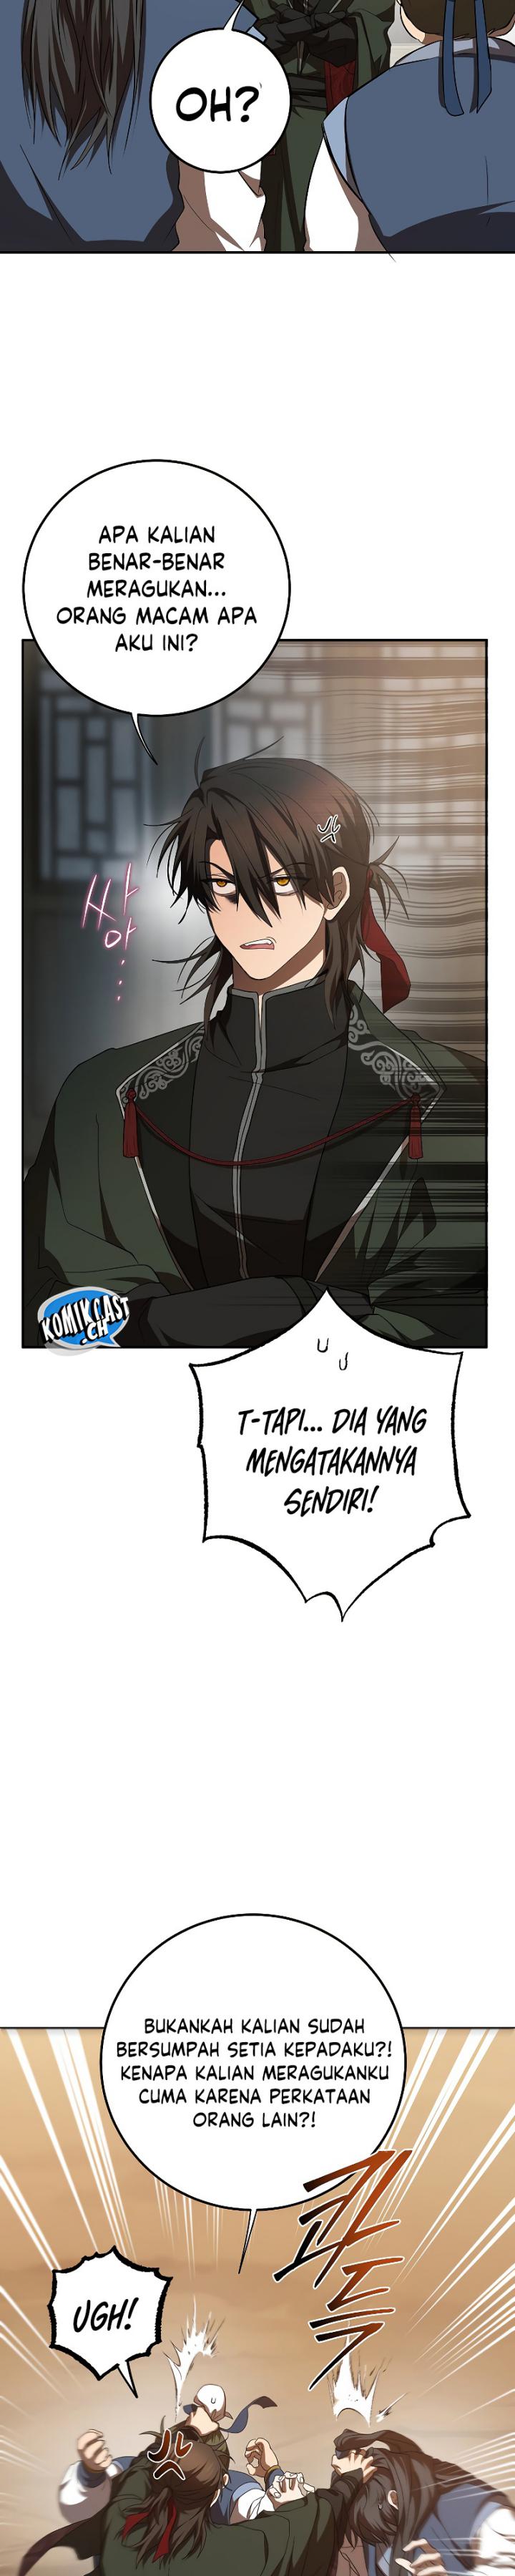 Path Of The Sword Chapter 118 S3 End - 255